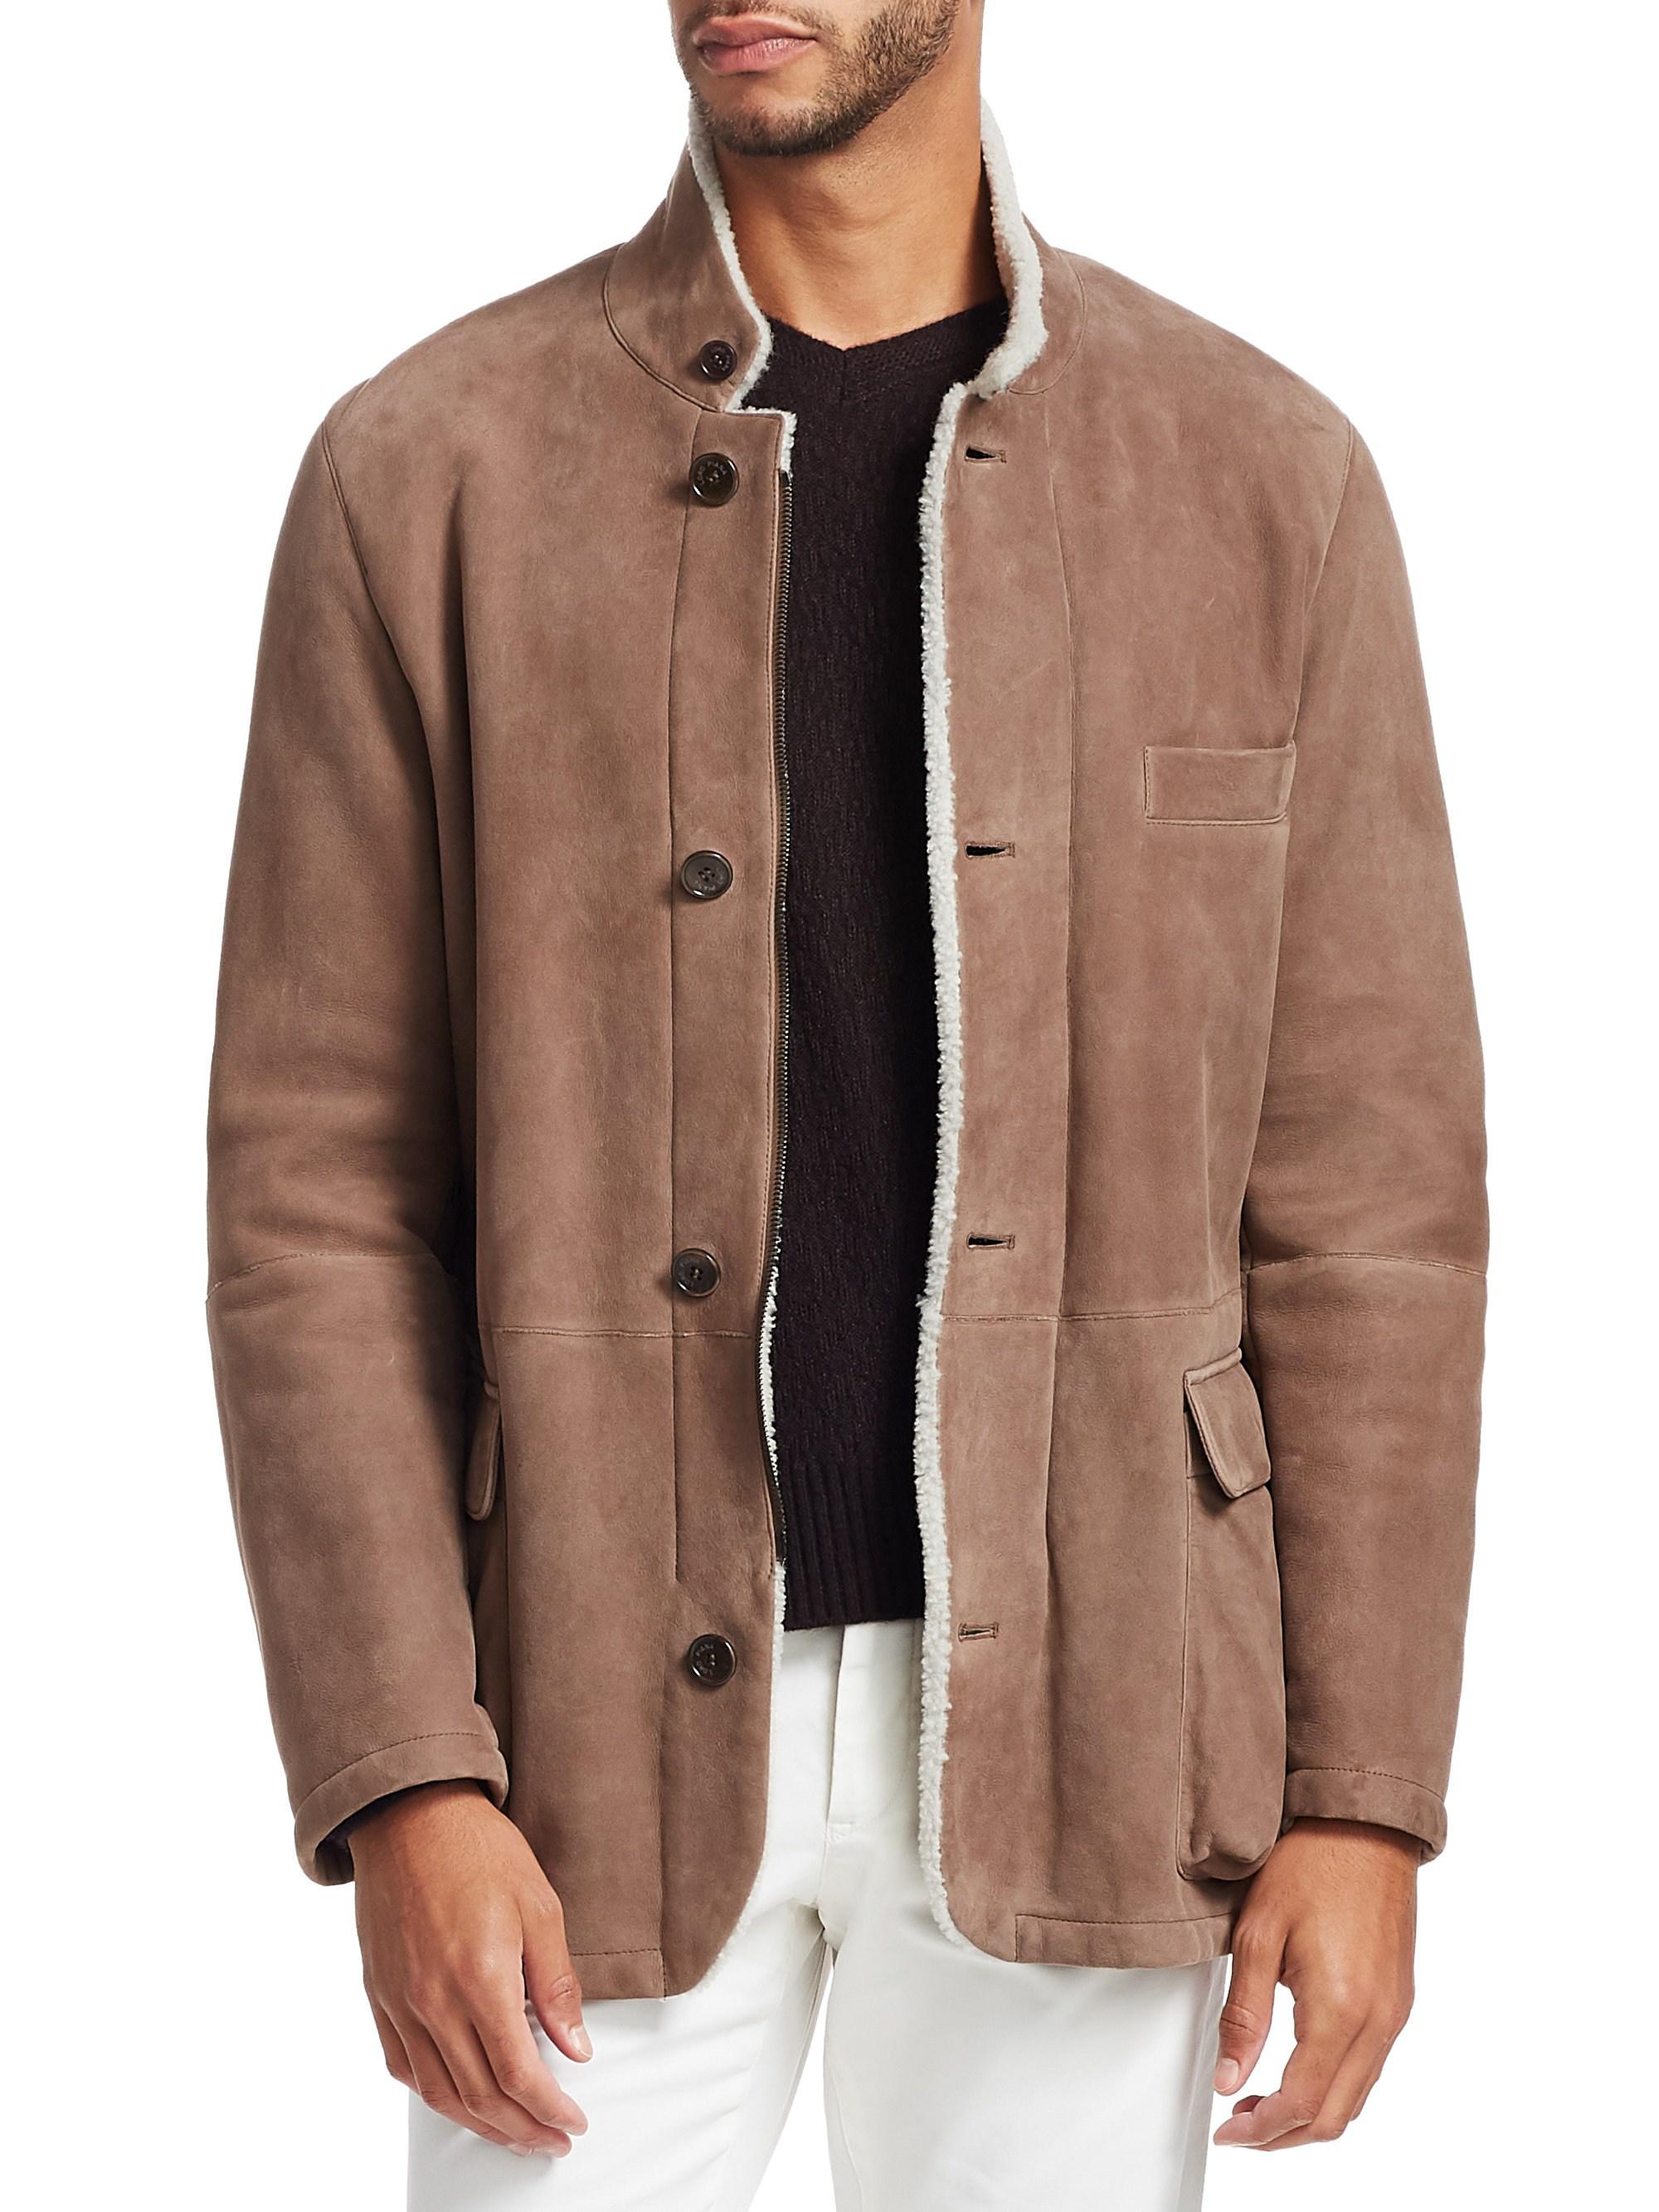 Loro Piana Roadster Shearling-lined Suede Jacket in Brown for Men - Lyst